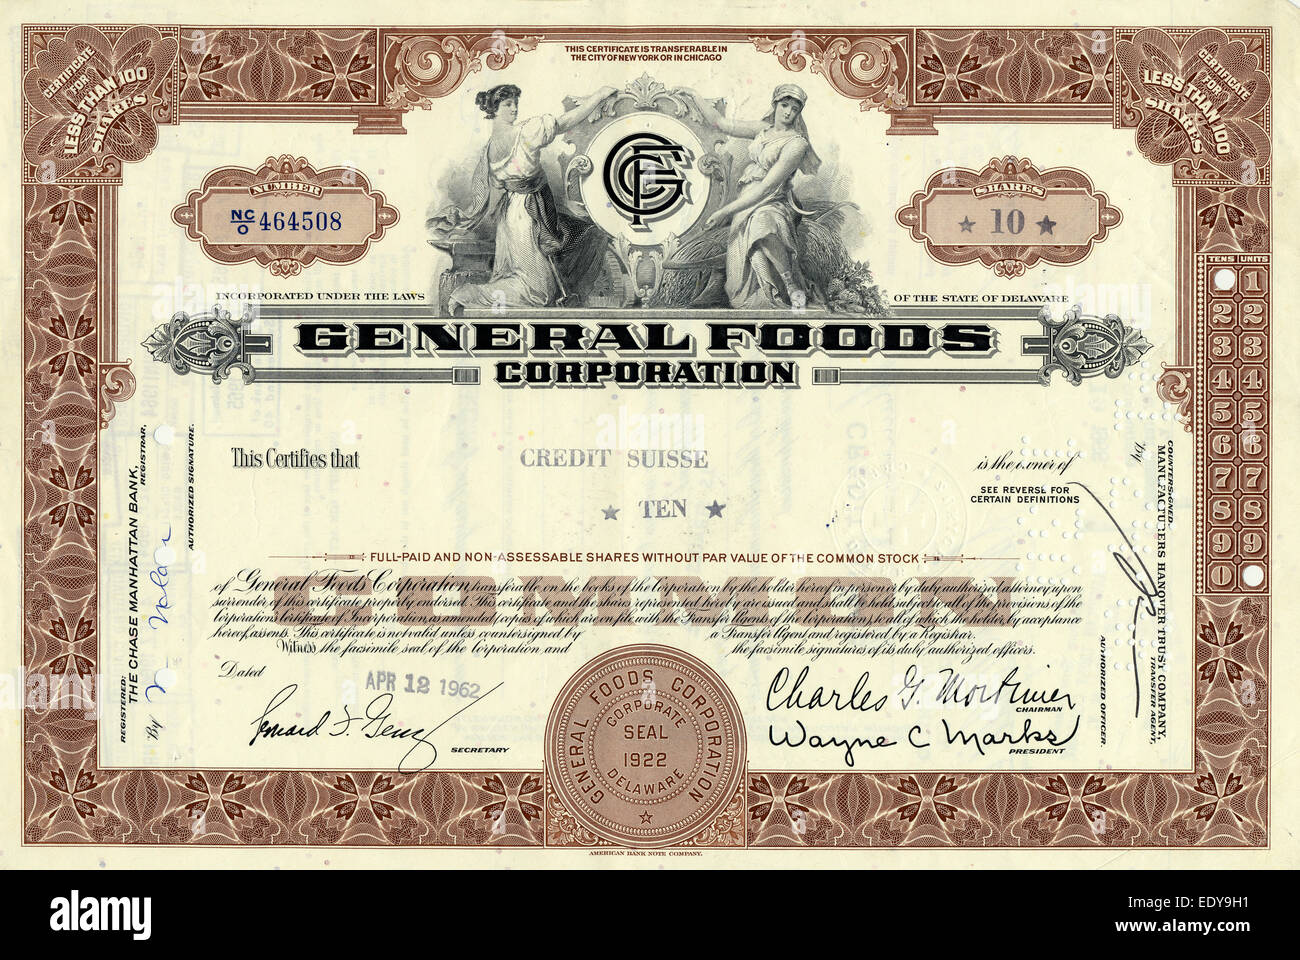 Historic share certificate, Steel engraving, allegorical depiction, General Foods Corporation Stock Photo